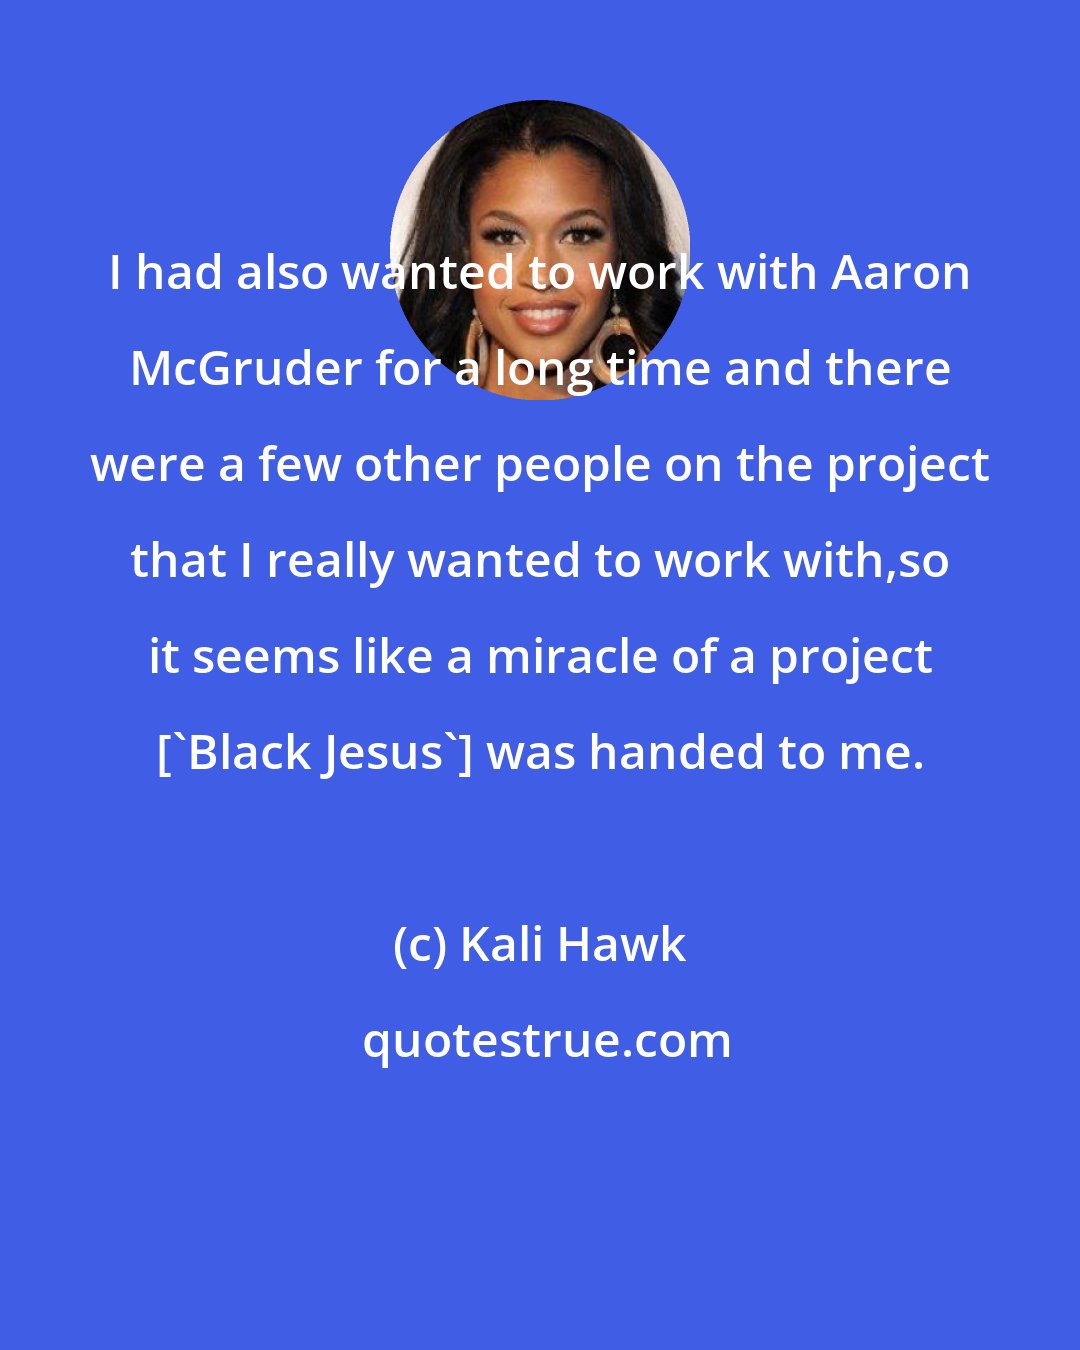 Kali Hawk: I had also wanted to work with Aaron McGruder for a long time and there were a few other people on the project that I really wanted to work with,so it seems like a miracle of a project ['Black Jesus'] was handed to me.